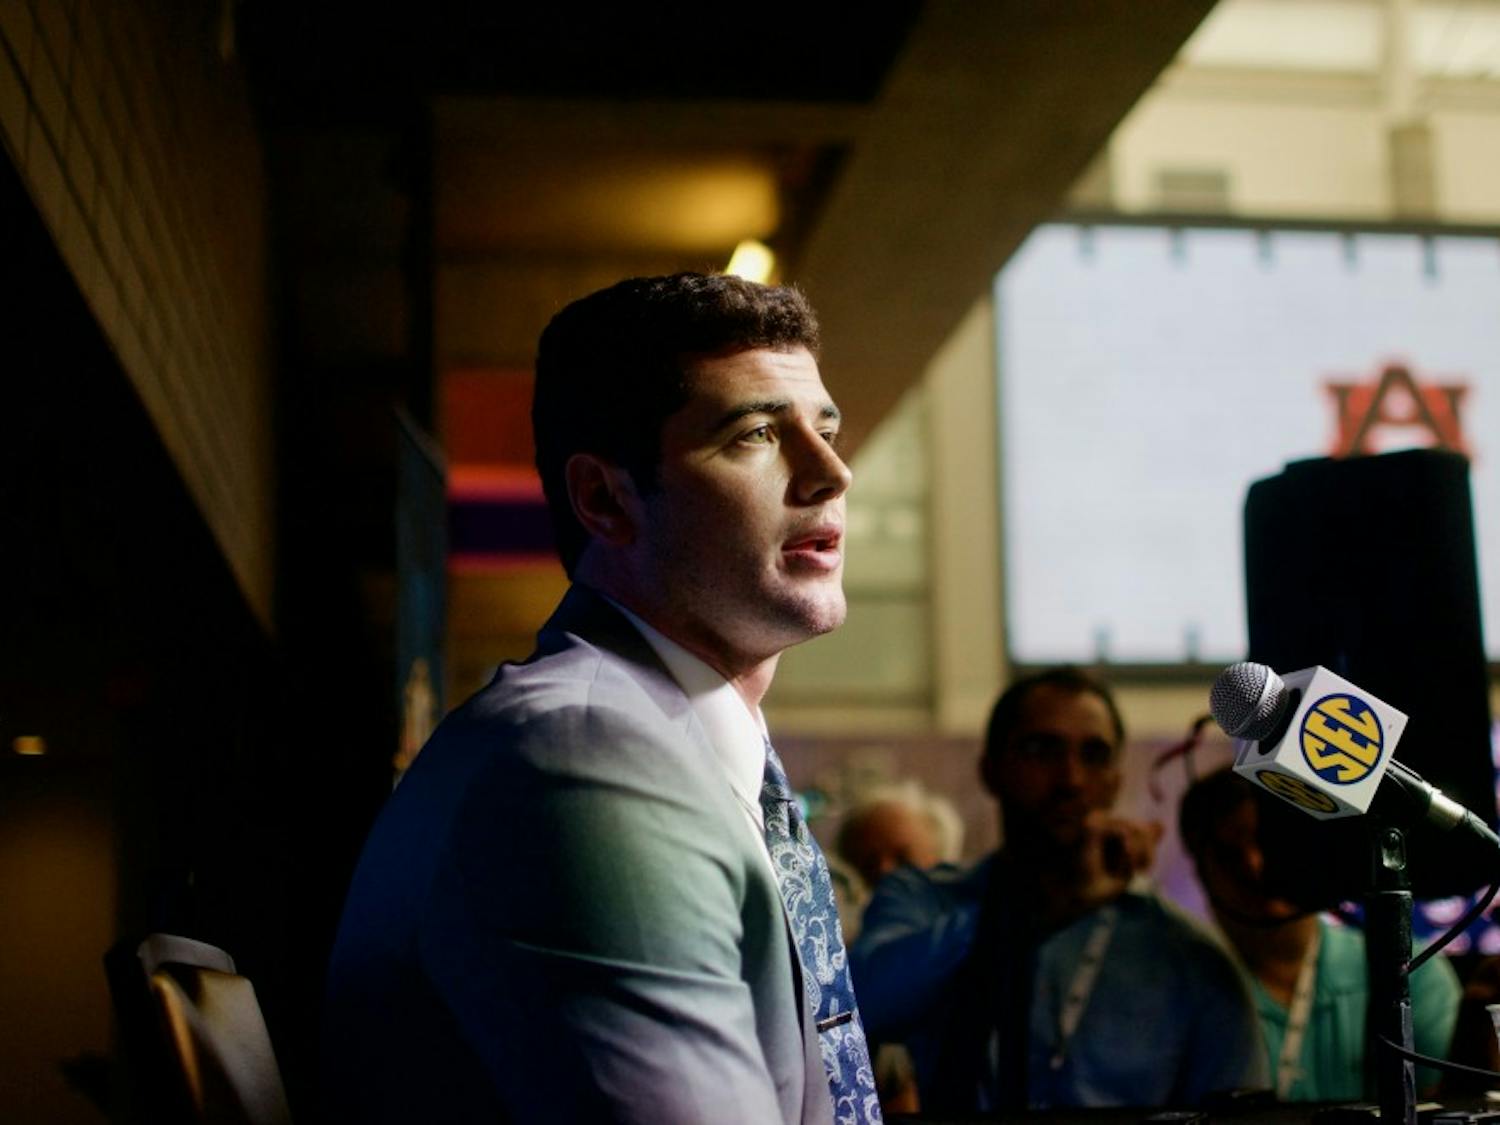 Jarrett Stidham answers a question during an interview at SEC Media Days in the College Football Hall of Fame on Thursday, July 19, 2018 in Atlanta, Ga.